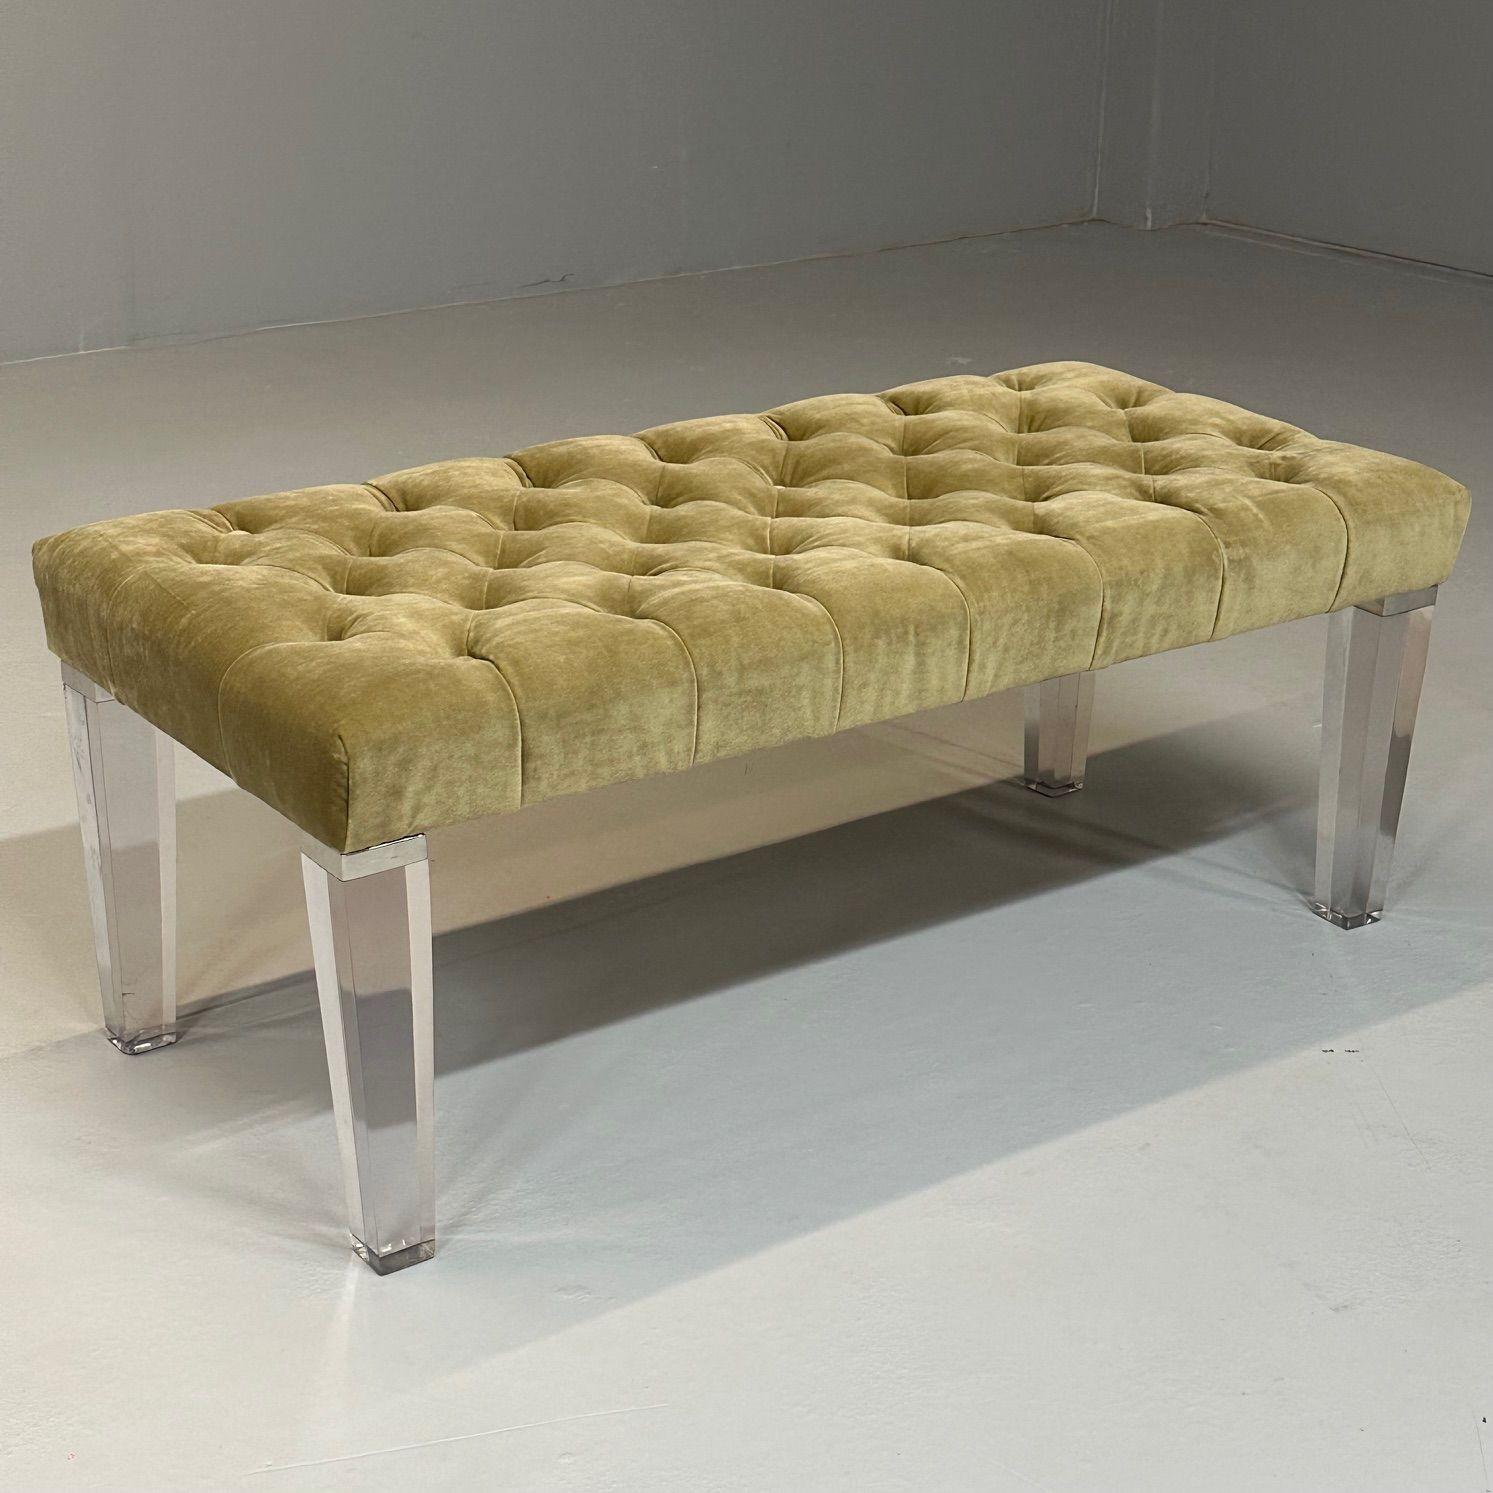 Contemporary, Modern Tufted Window Bench, Chrome, Acrylic, Green Velvet, 2010s

Retails for $2,272

IPZ